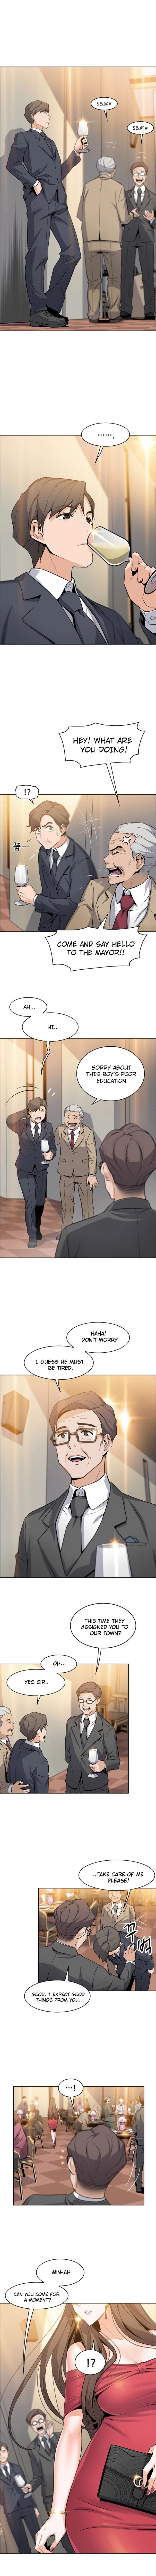 Housekeeper Manhwa - Chapter 6 Page 8